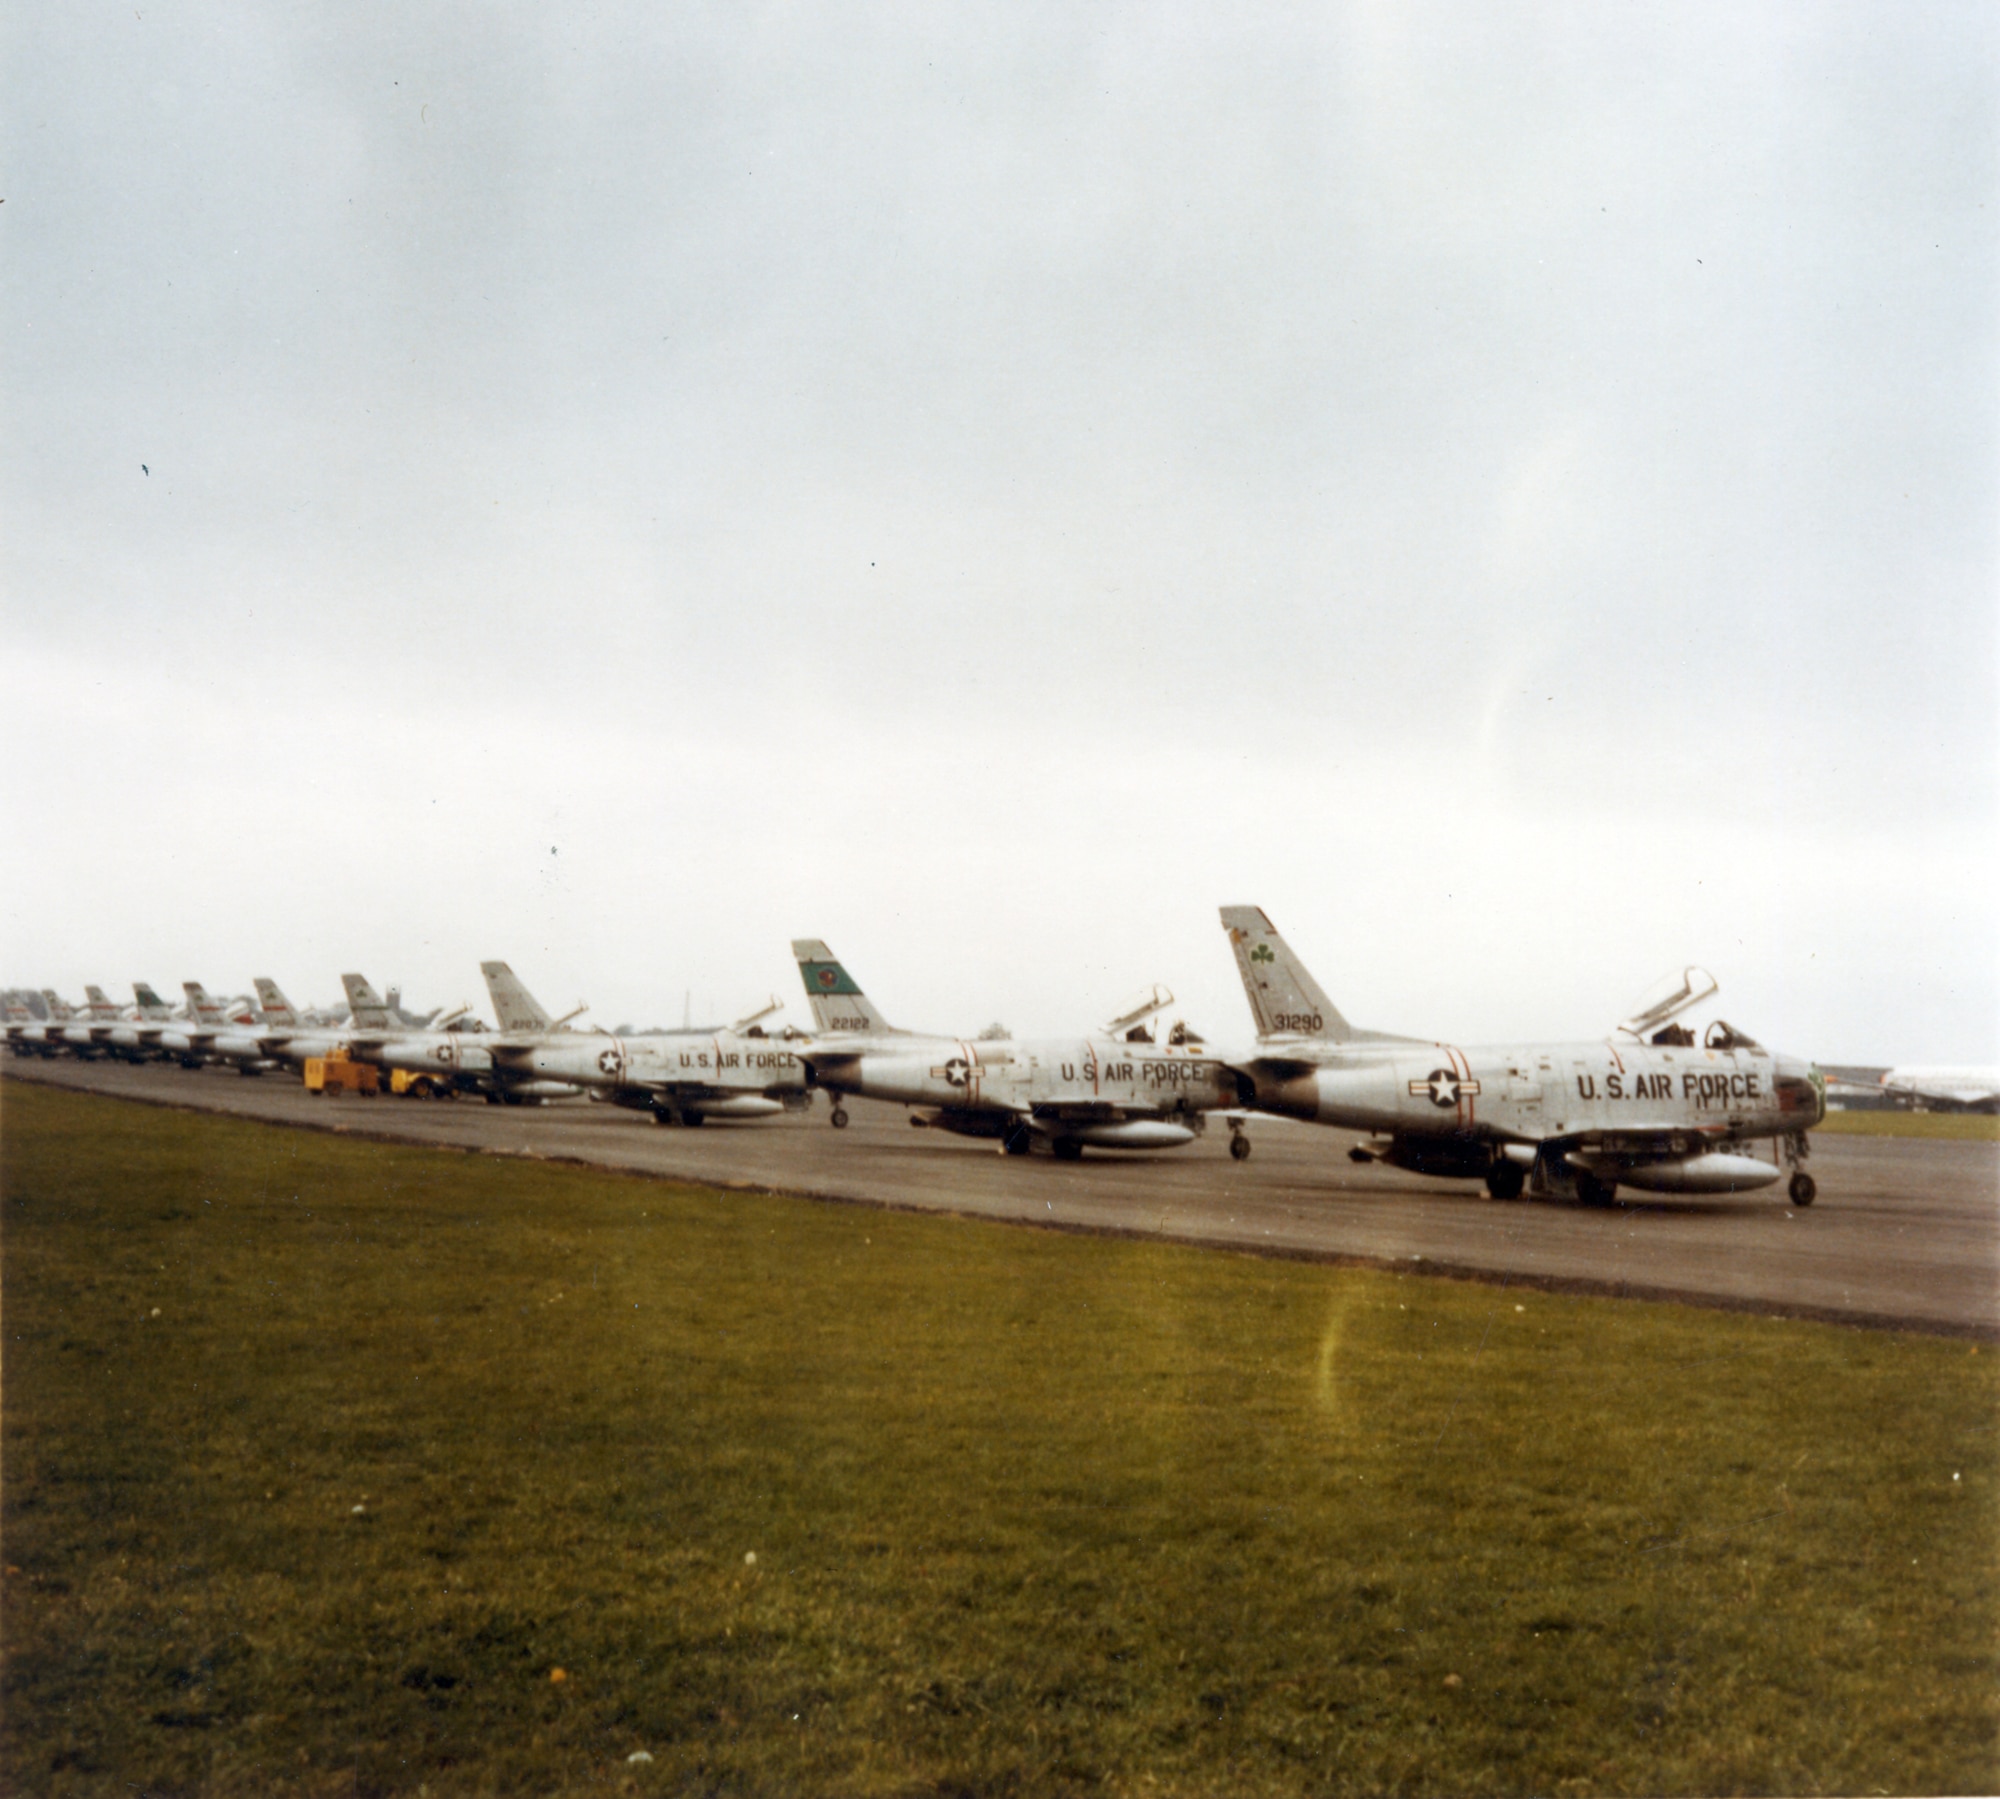 F-86Hs at Prestwick Air base, Scotland after flying the North Atlantic from the U.S. as part of Operation Stair Step, Oct. 1961. After refueling, they continued to their new base in France.